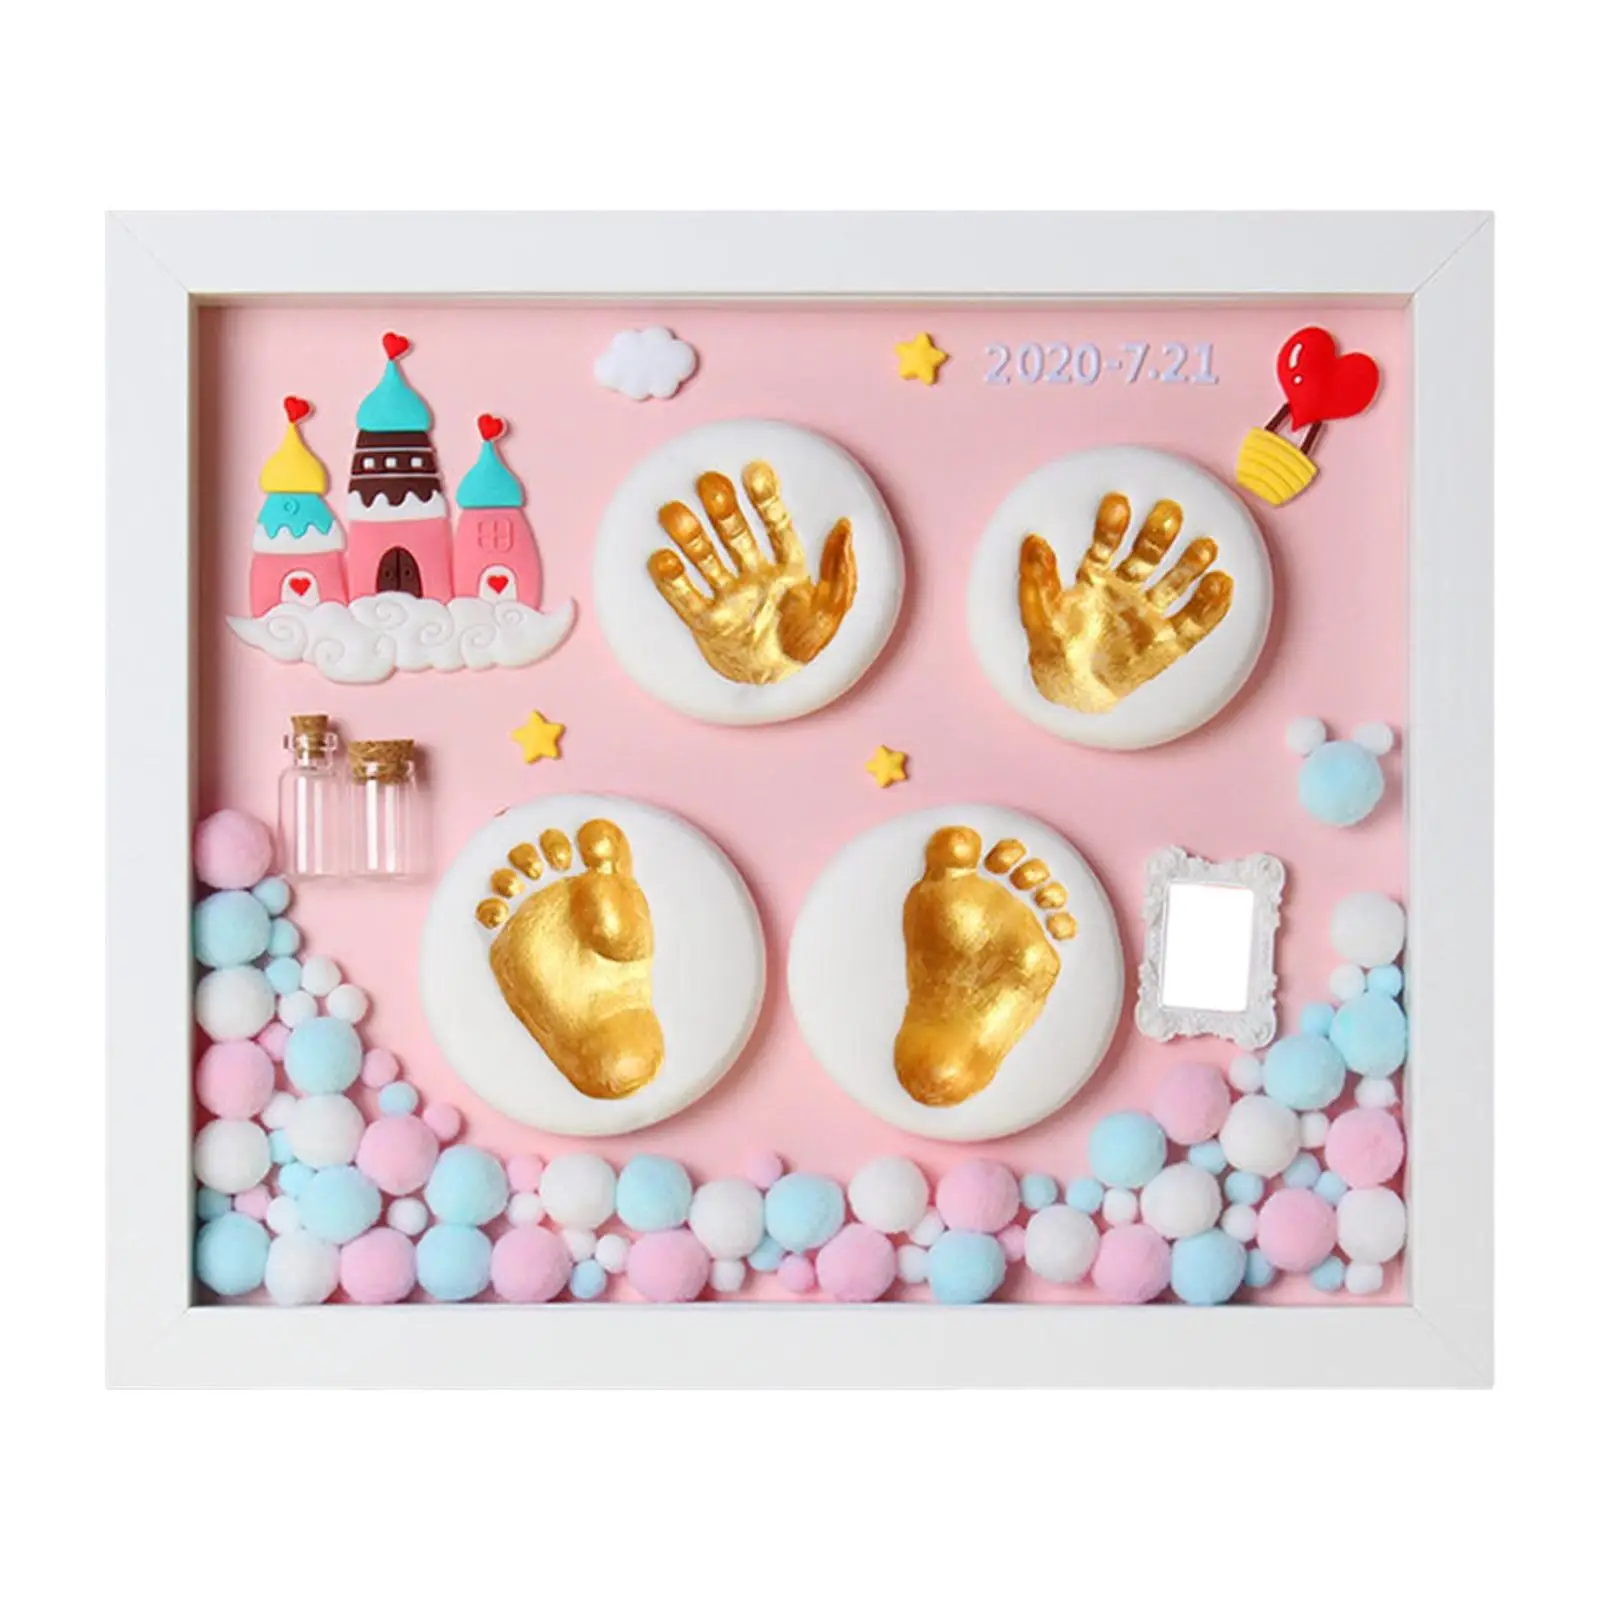 Baby Picture Photo Frame Footprint & Handprint Kit W/ Ink Pad for Kids Gift